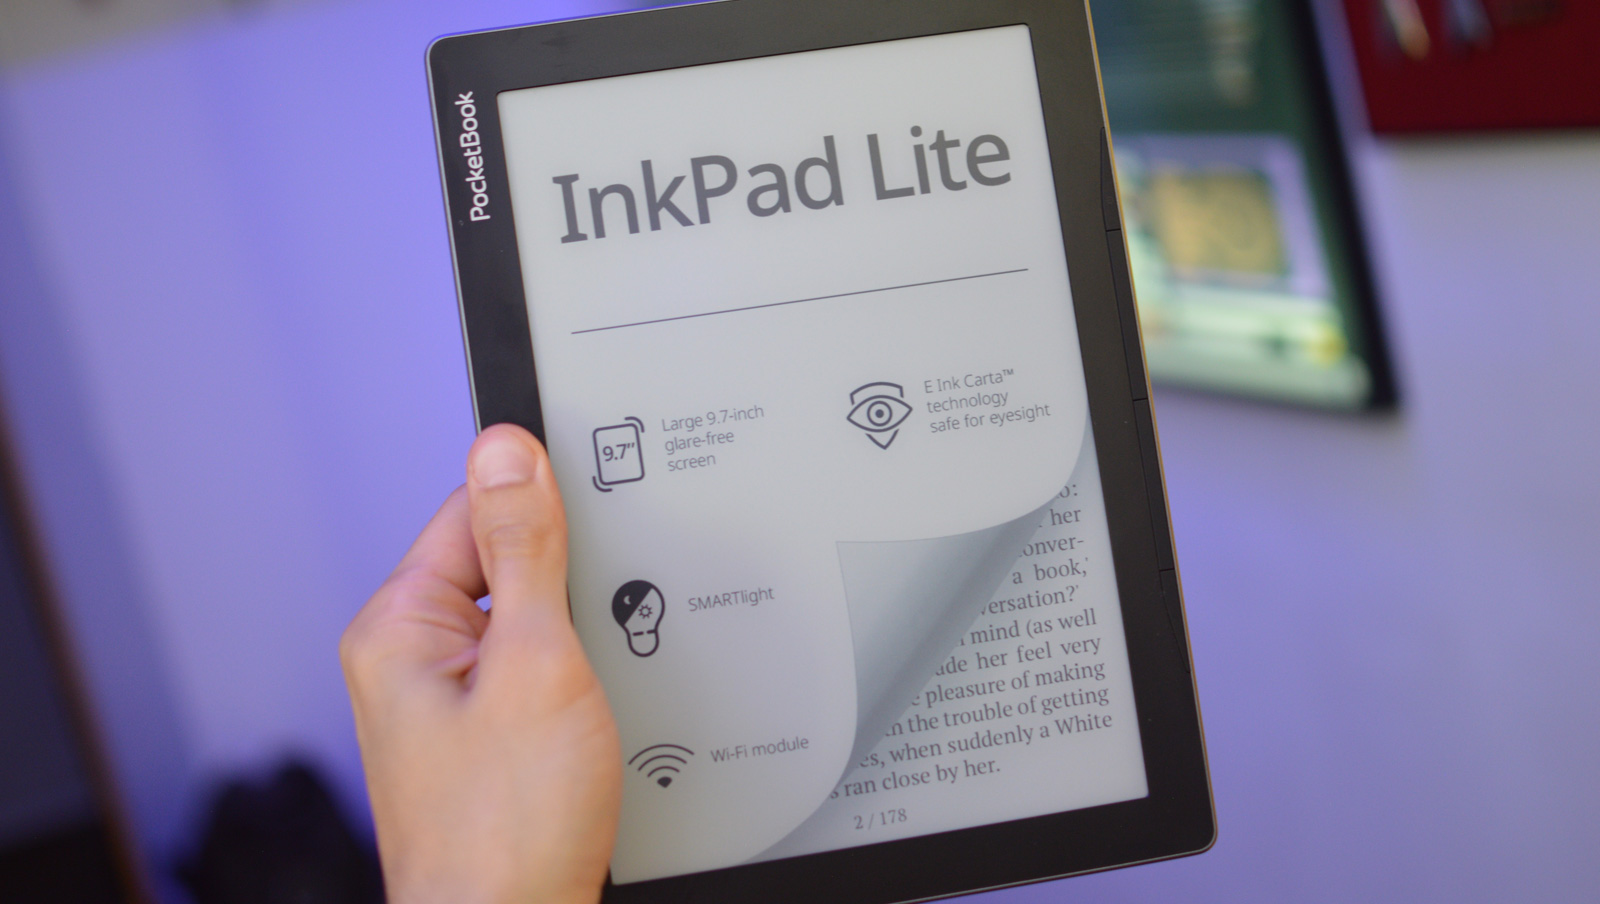 PocketBook InkPad Lite: Is the 9.7 inch low-res screen good enough